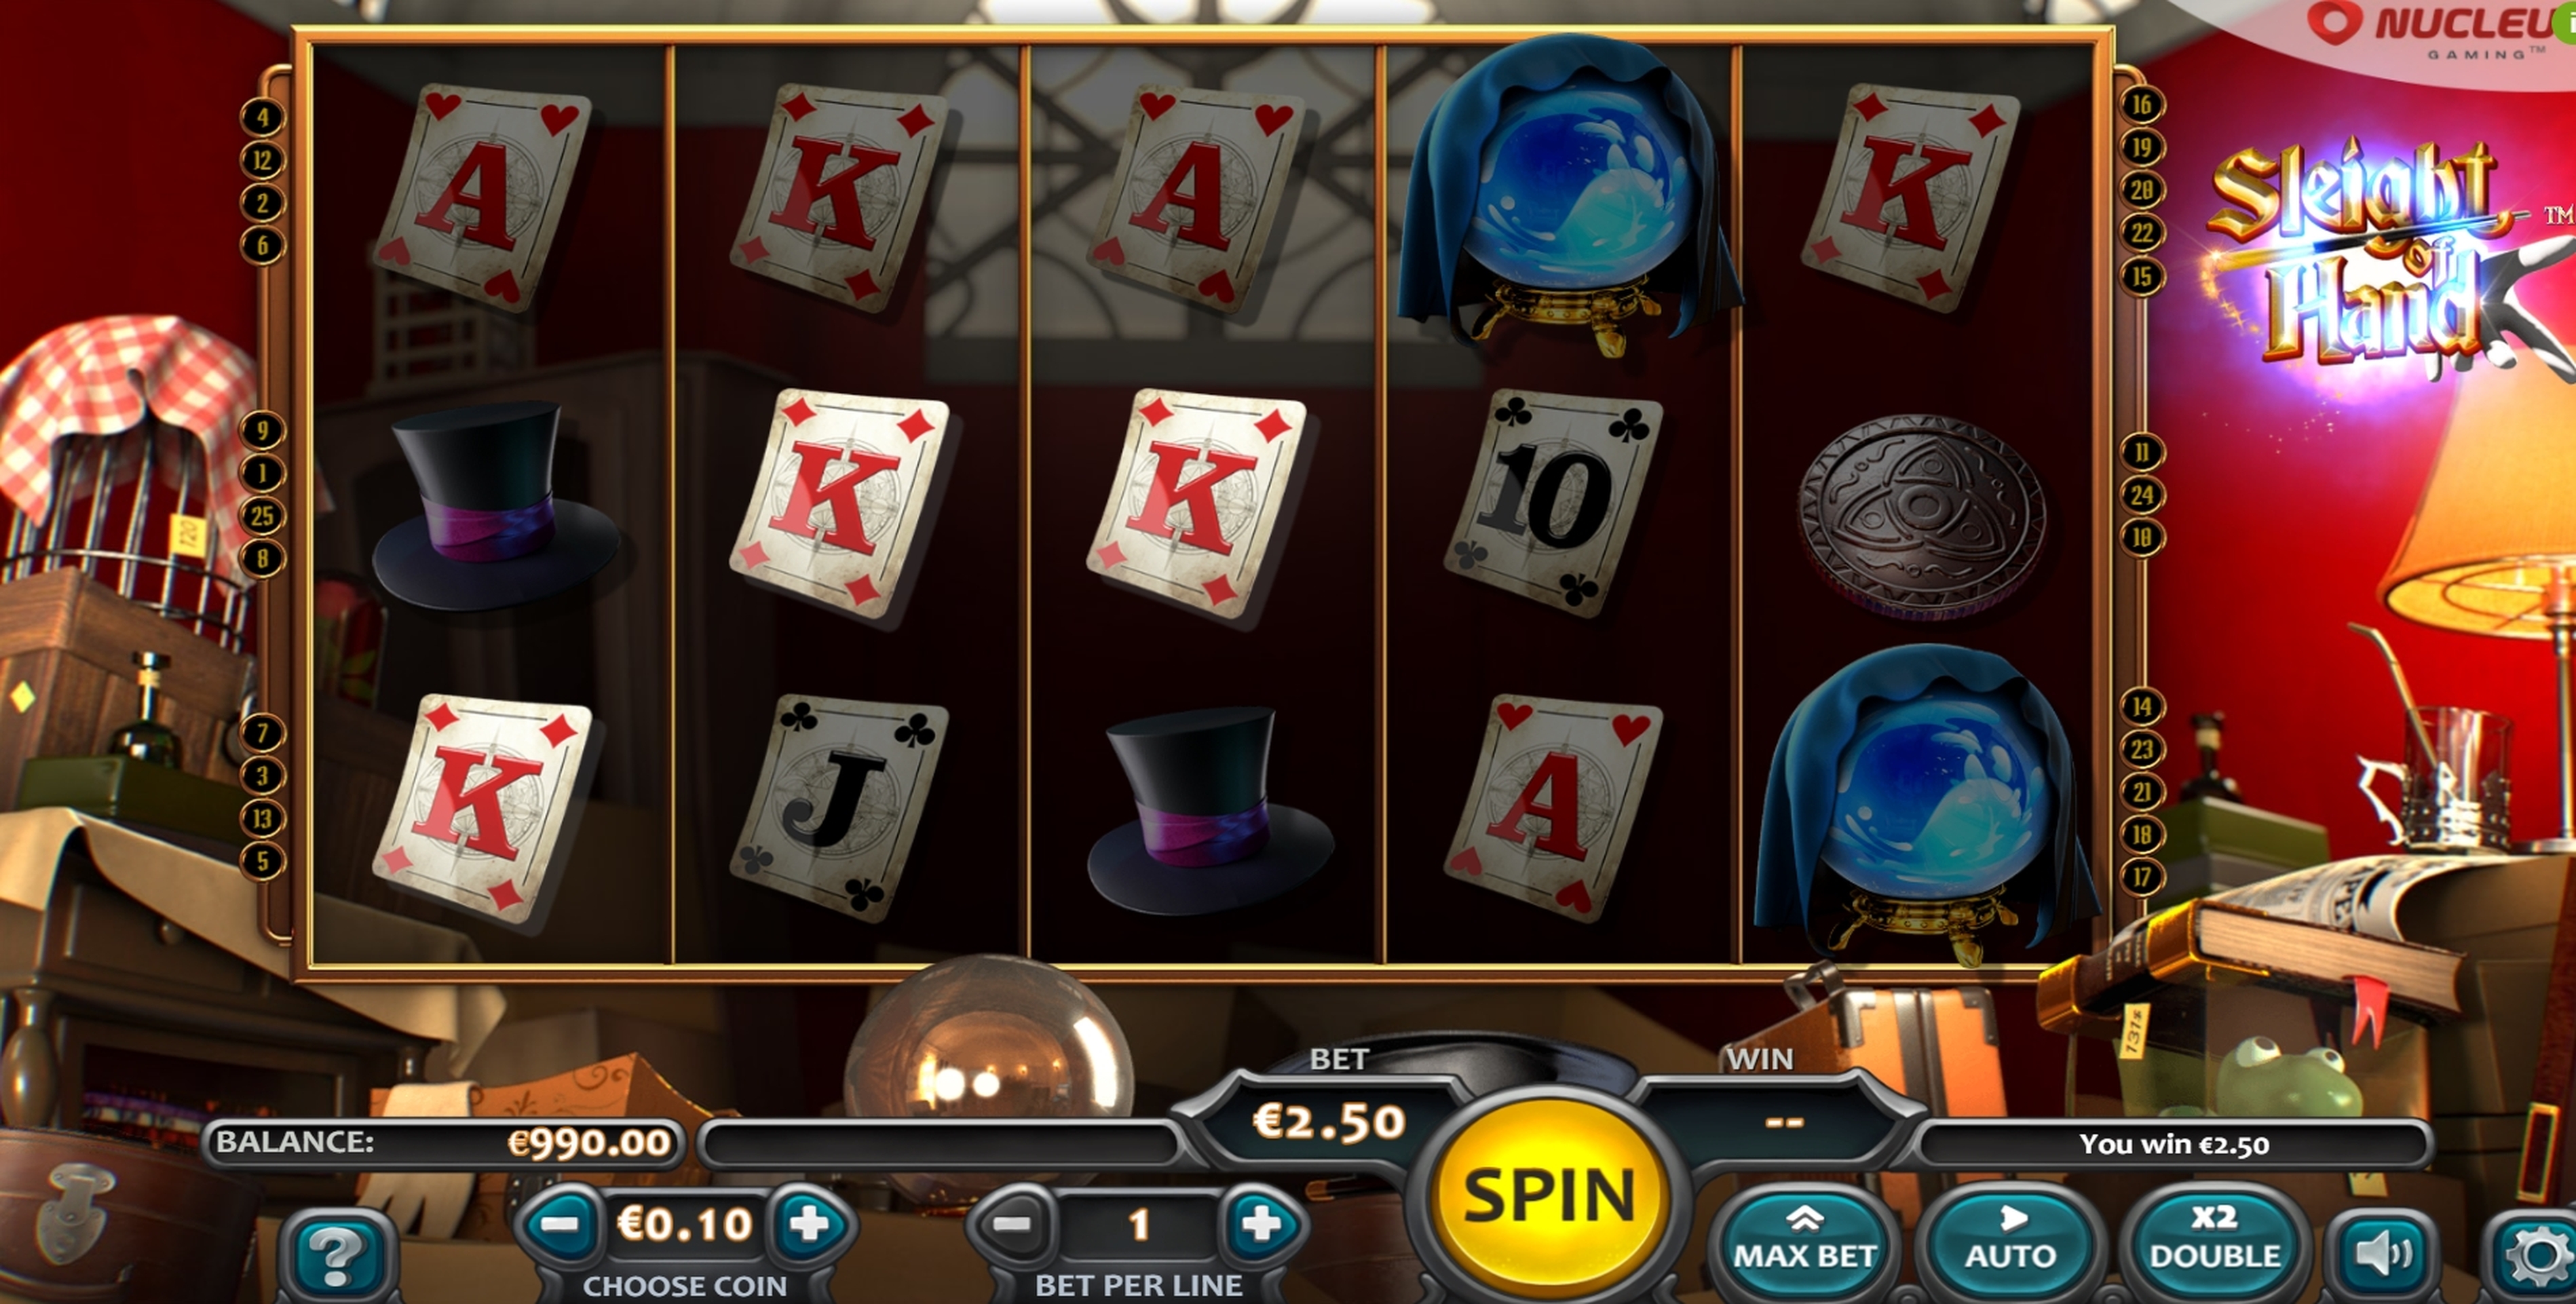 Win Money in Sleight of Hand Free Slot Game by Nucleus Gaming